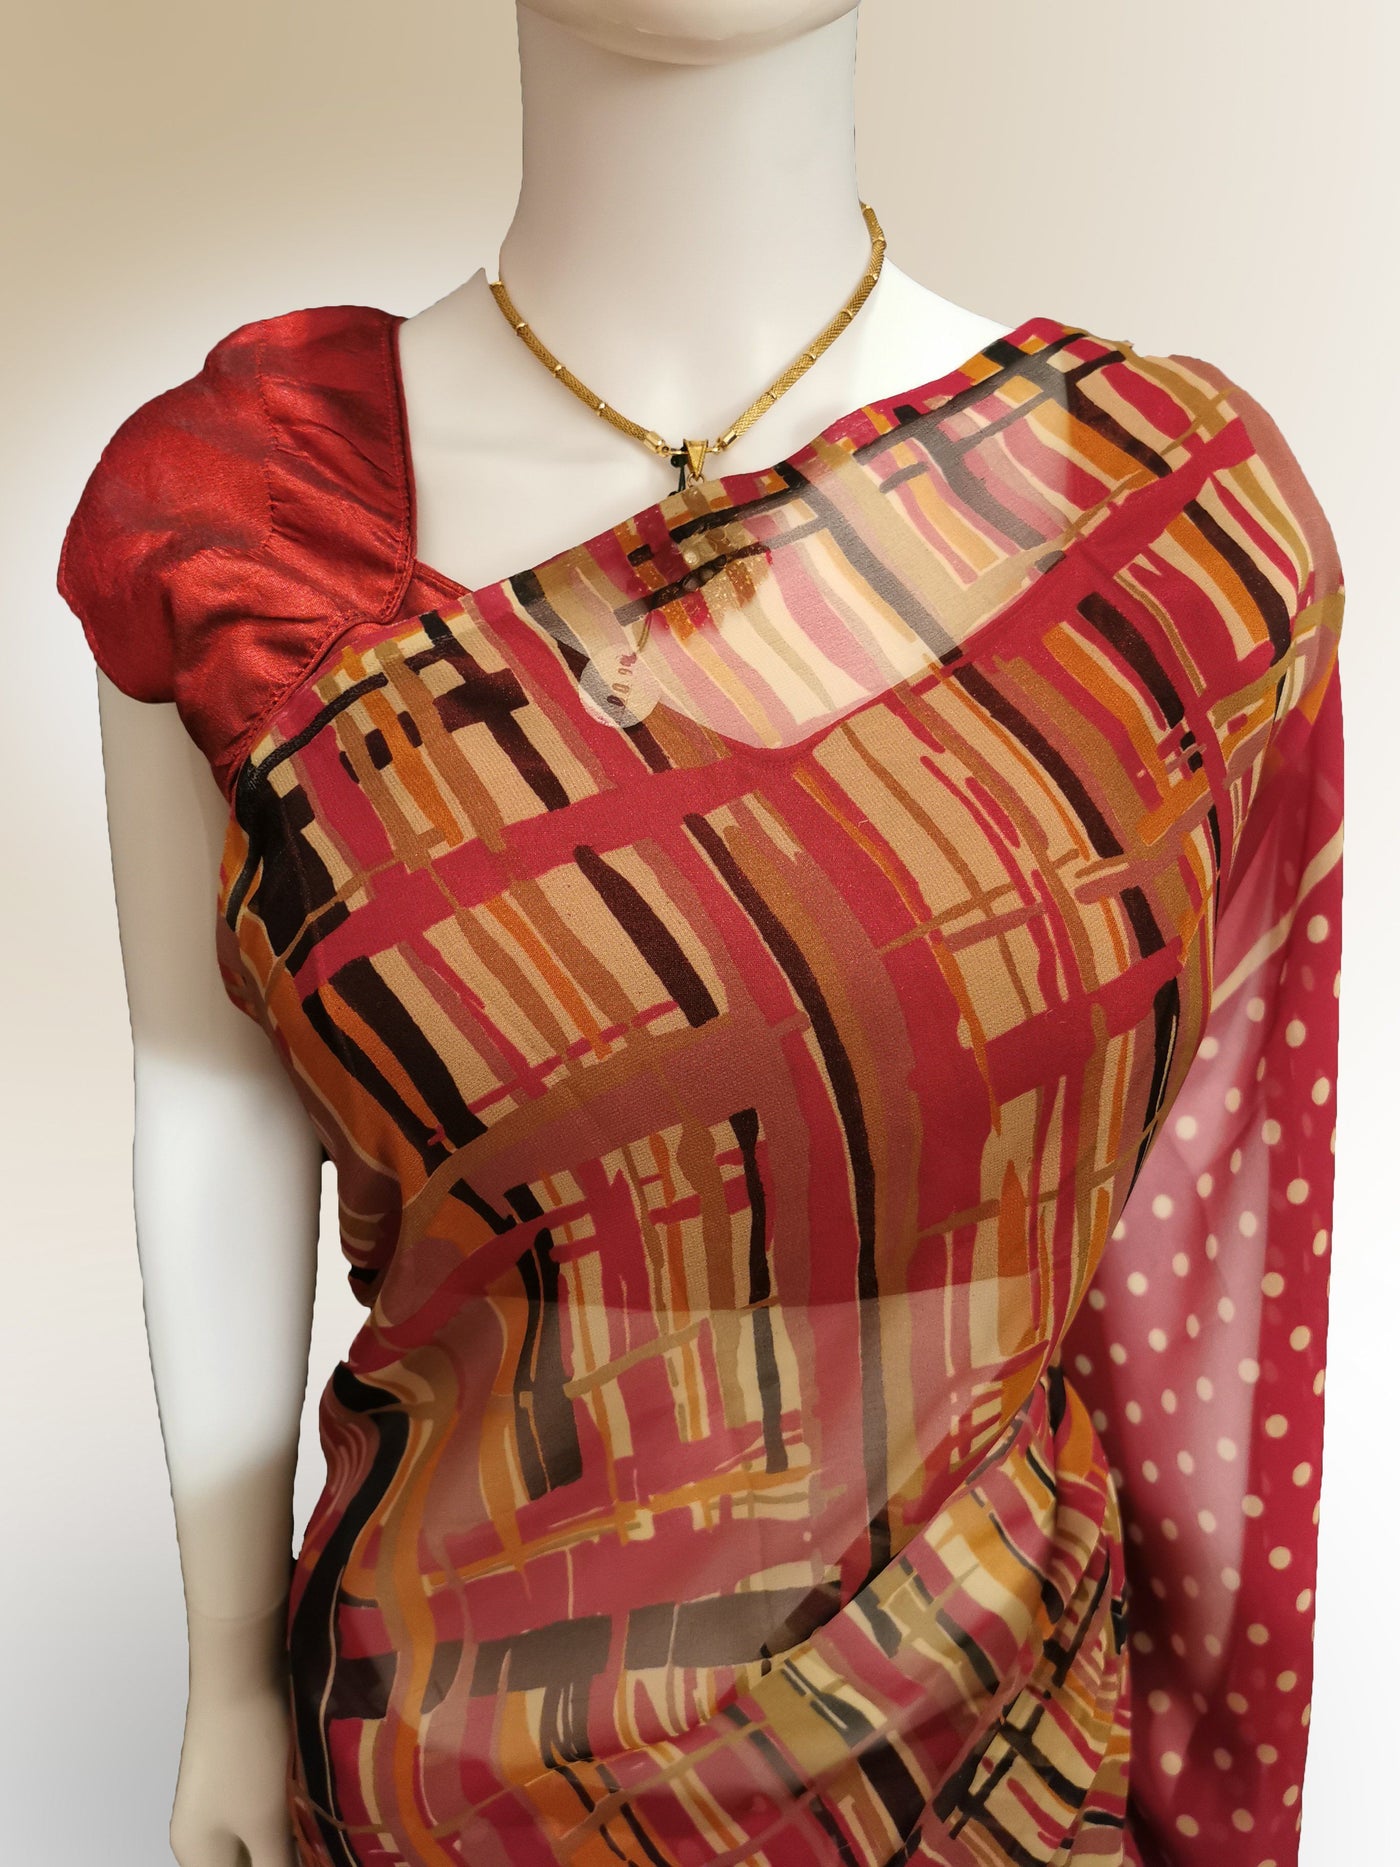 Saree in Red and Black with Brush Print Indian Clothing in Denver, CO, Aurora, CO, Boulder, CO, Fort Collins, CO, Colorado Springs, CO, Parker, CO, Highlands Ranch, CO, Cherry Creek, CO, Centennial, CO, and Longmont, CO. NATIONWIDE SHIPPING USA- India Fashion X